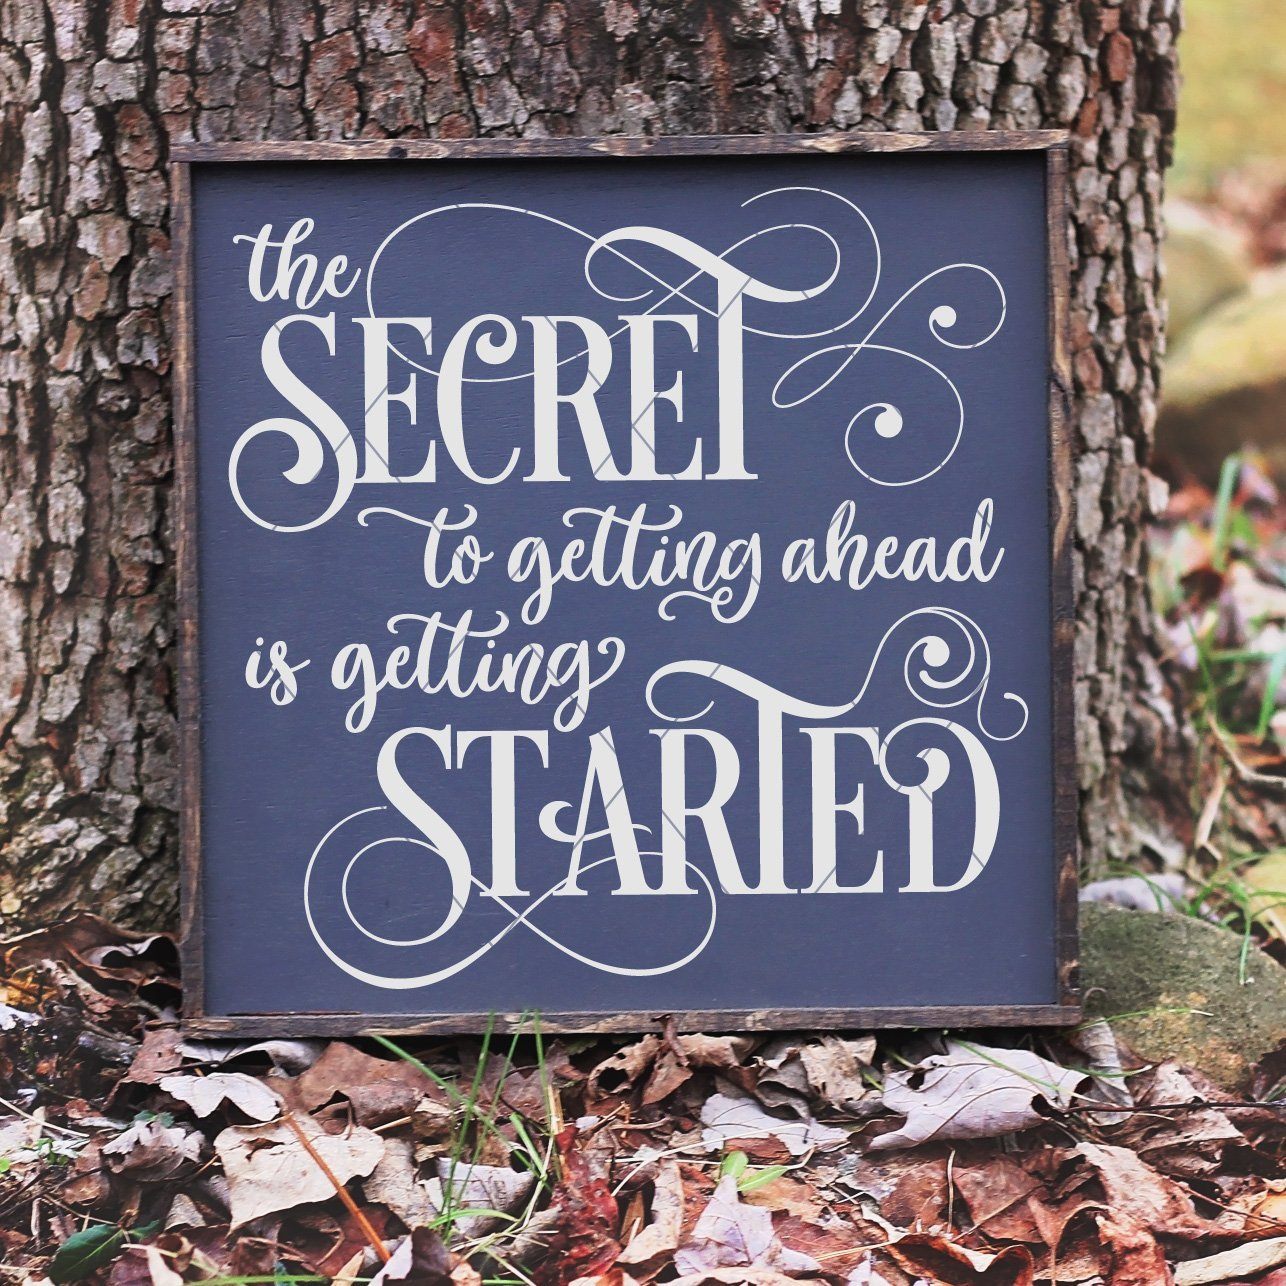 The Secret To Getting Ahead Mark Twain Quote SVG File - Commercial Use SVG Files for Cricut & Silhouette